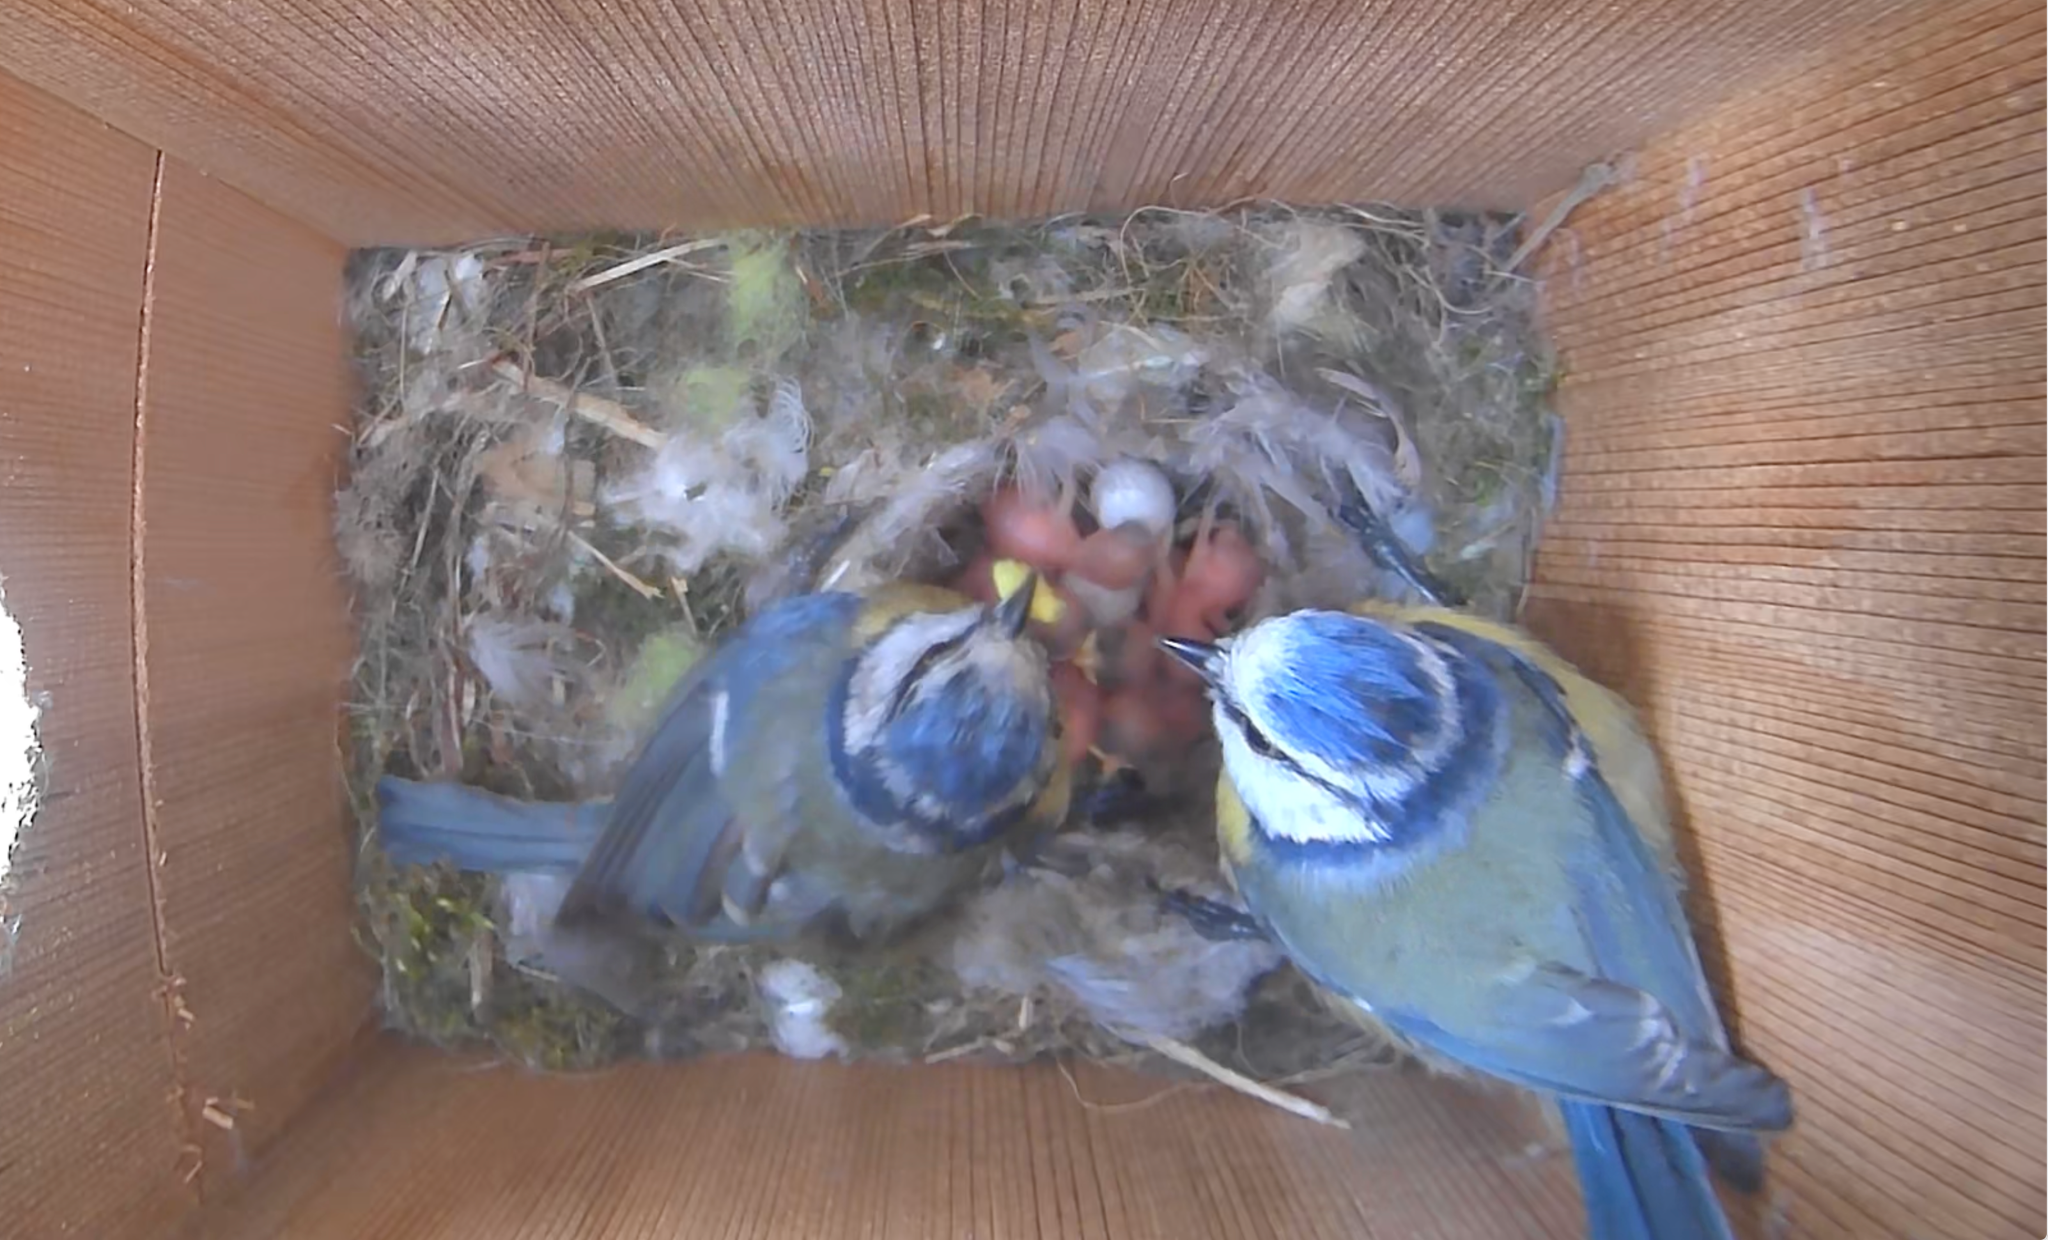 Hatching Time Nestera. Interior view of bird house can be seen. 2 birds and hatchlings can be seen in image.